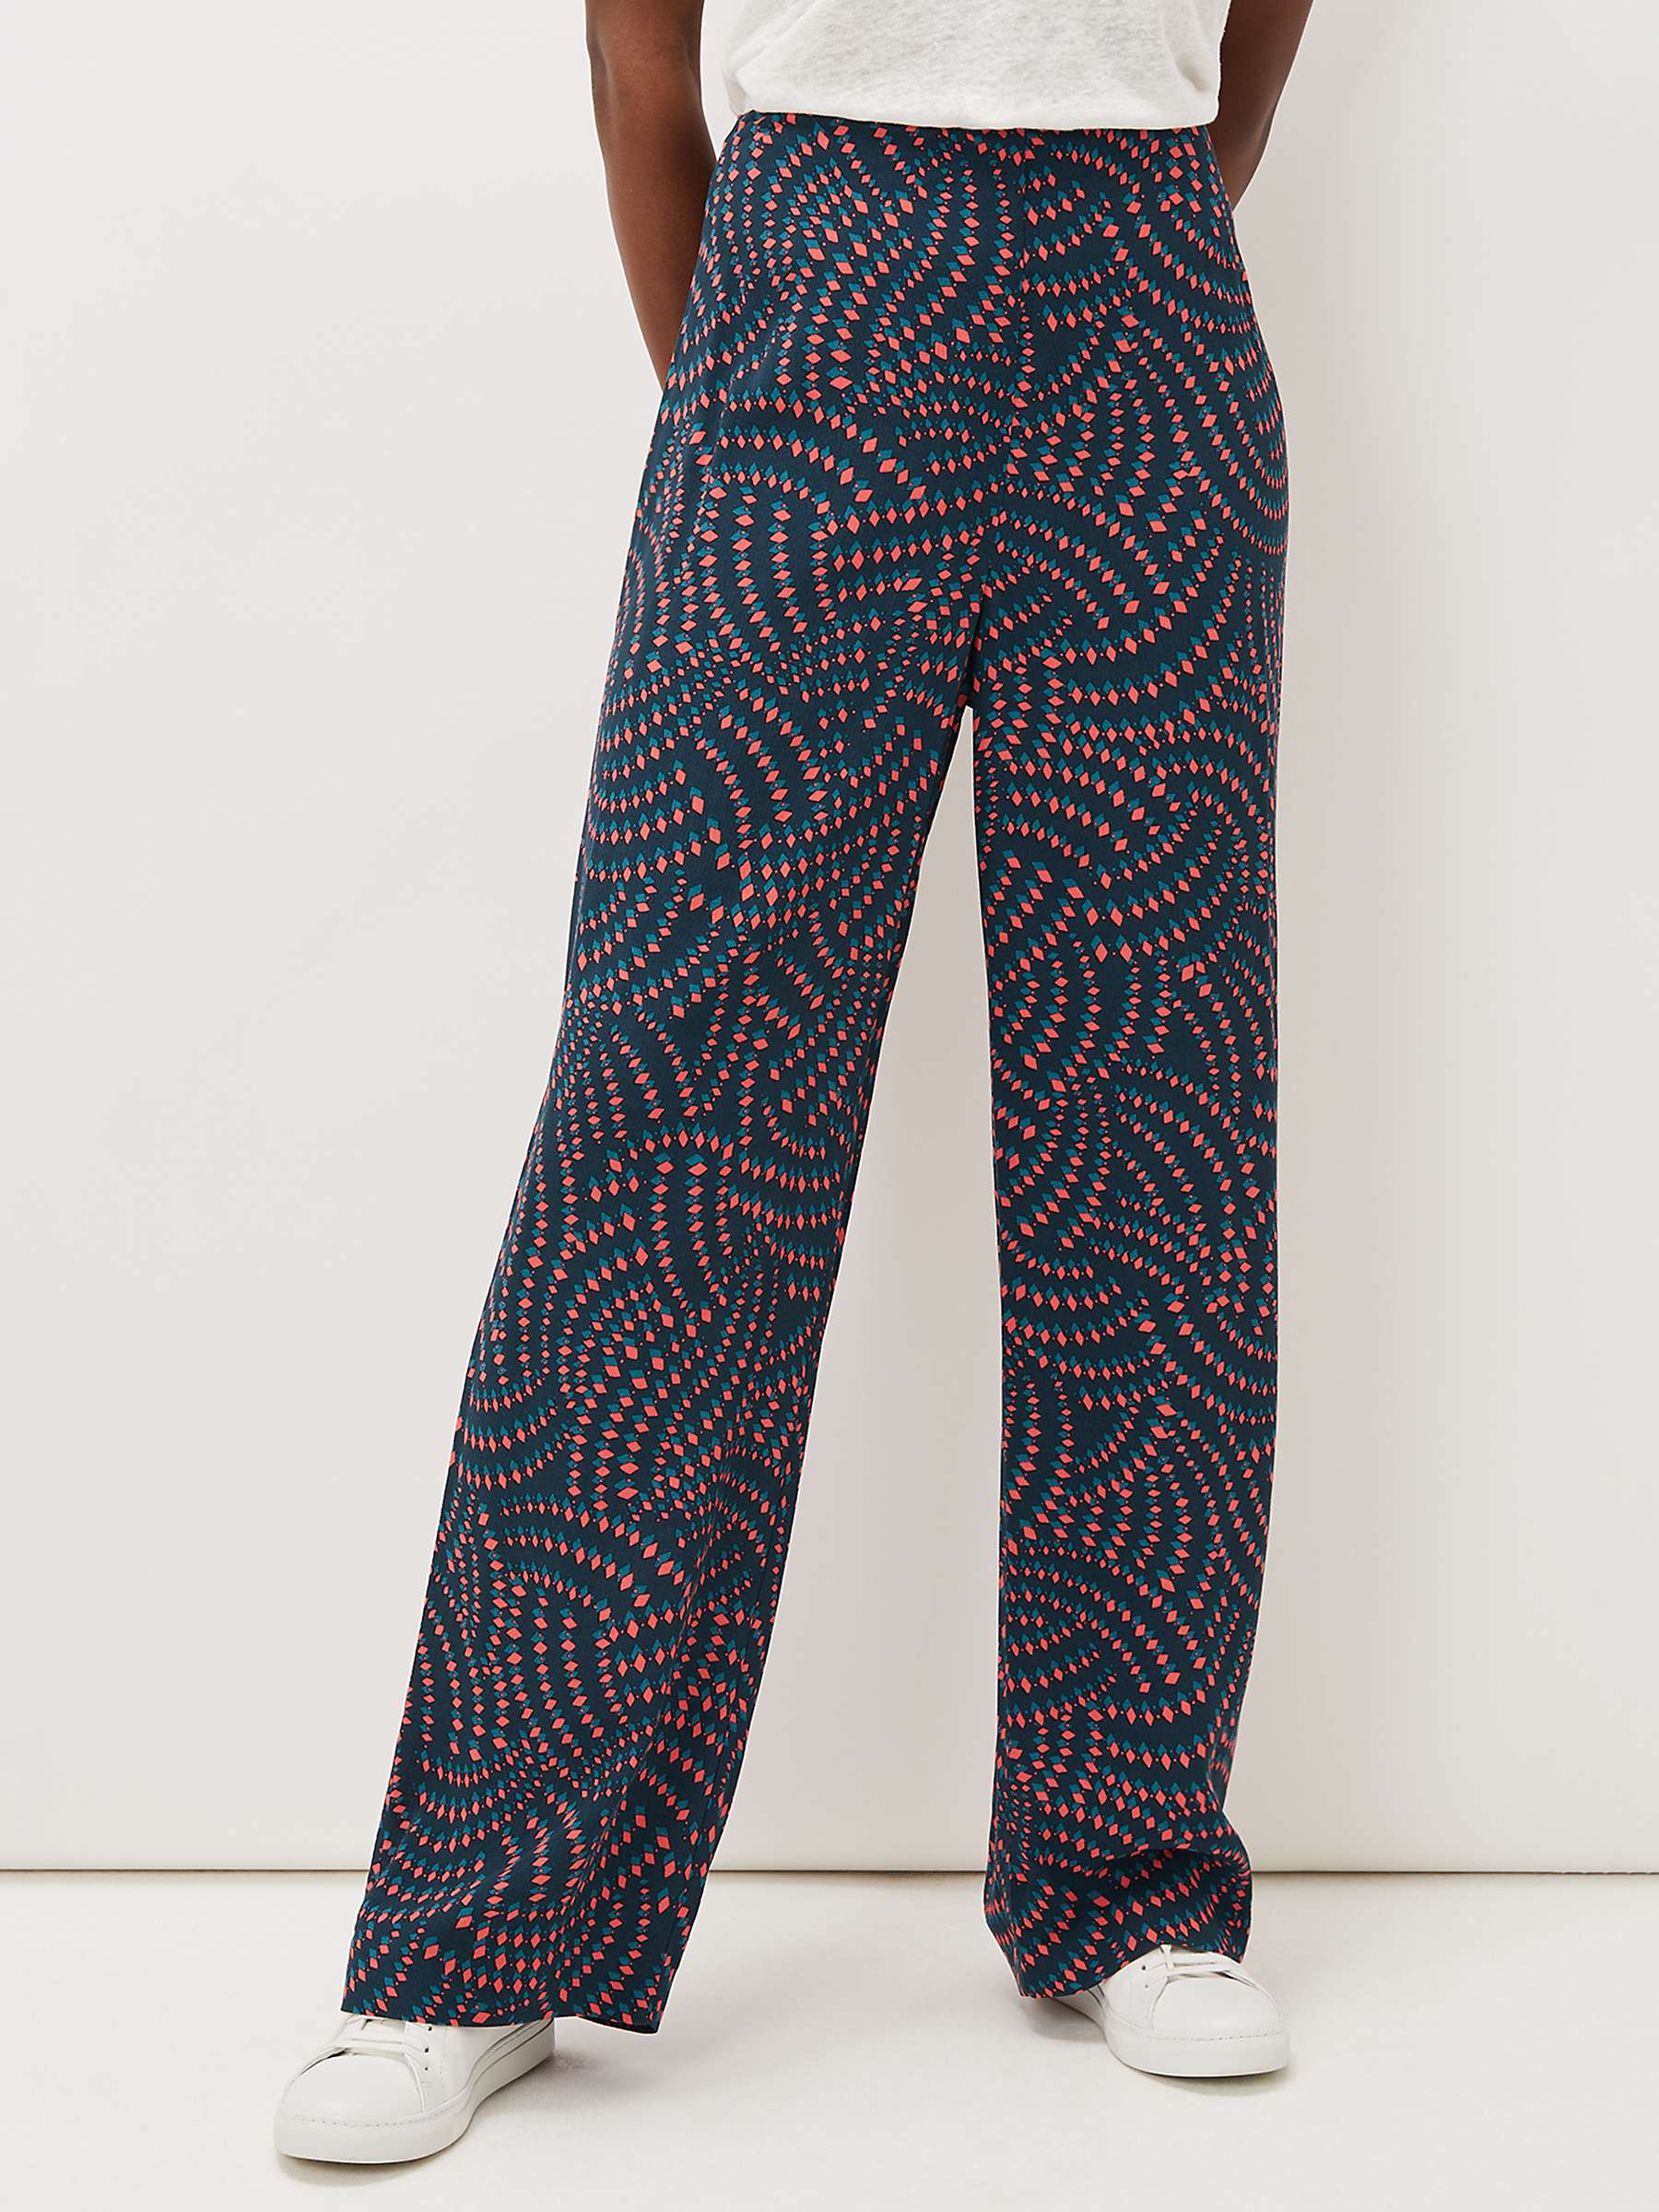 Buy Phase Eight Grace Geometric Print Trousers, Navy/Multi Online at johnlewis.com